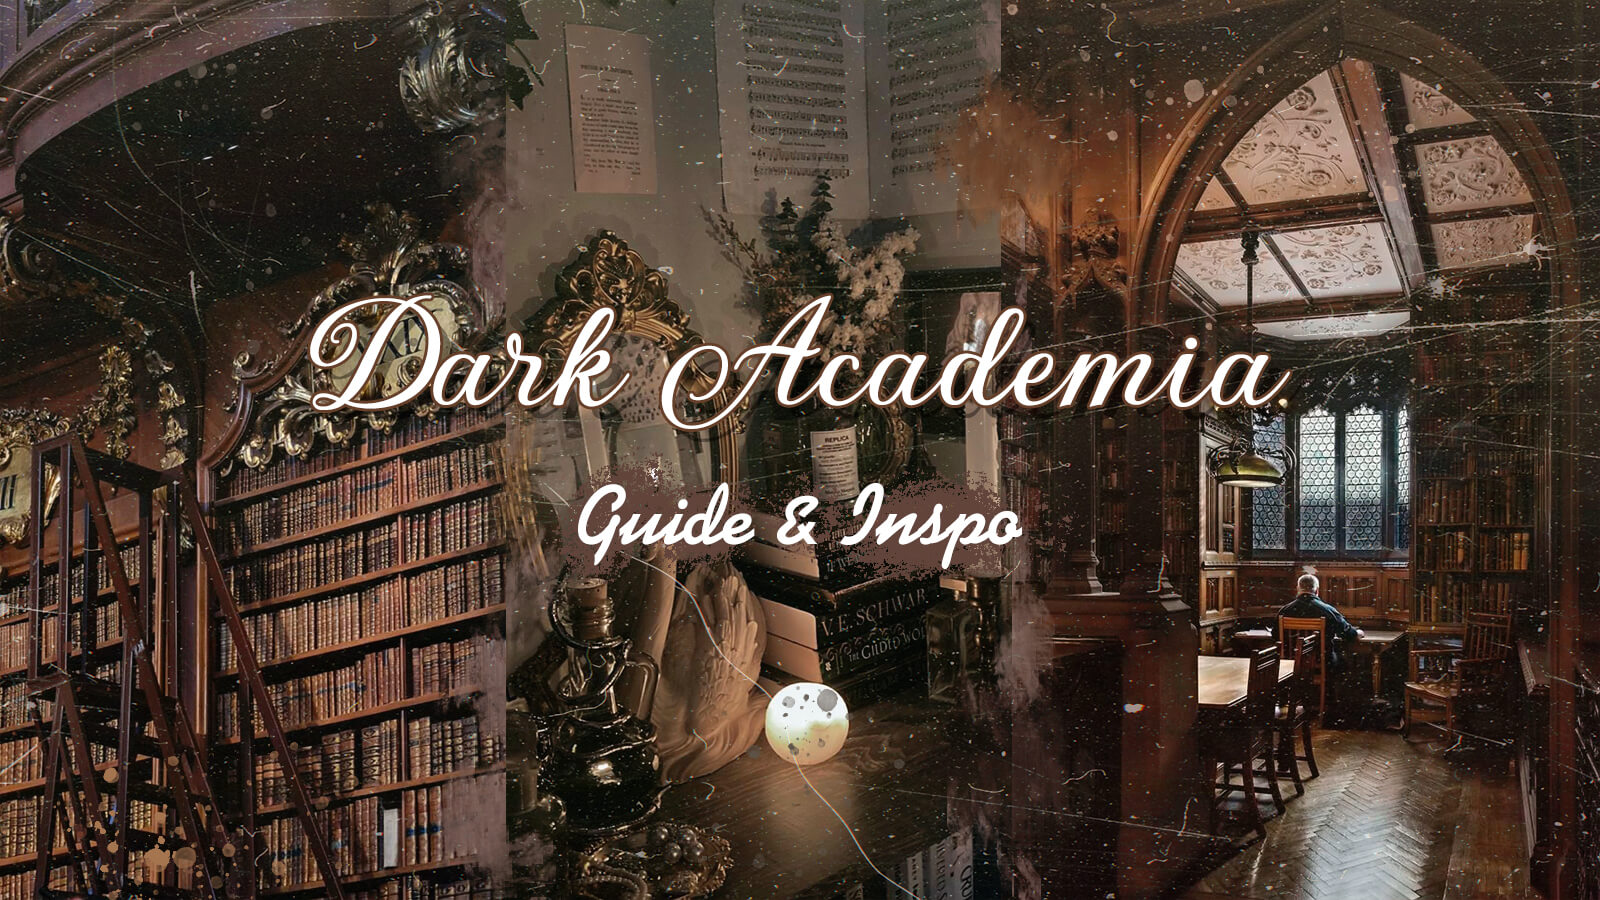 Dark Academia Fashion Is Moody, Literary, and Trending